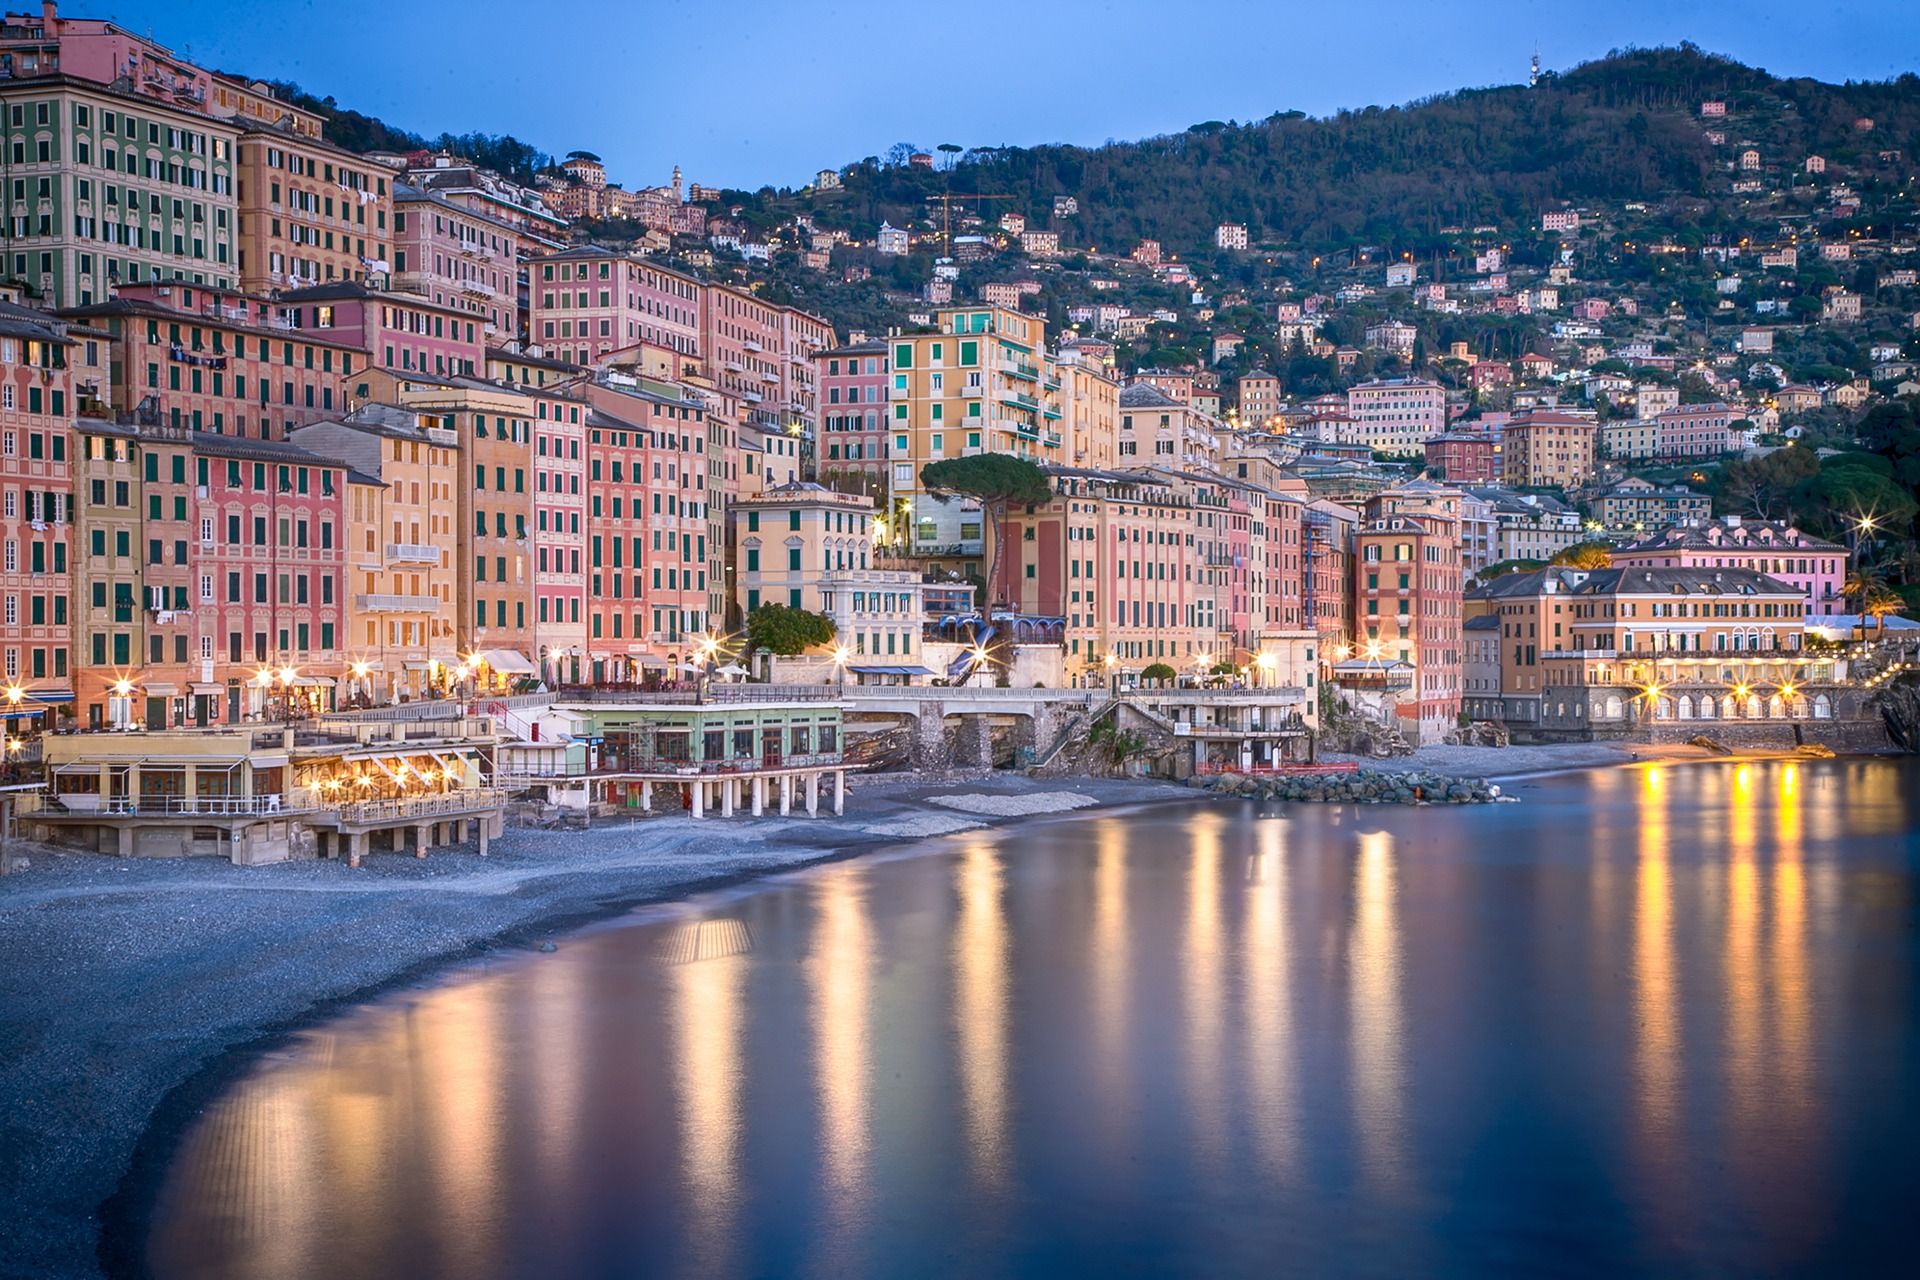 The seafront of Camogli